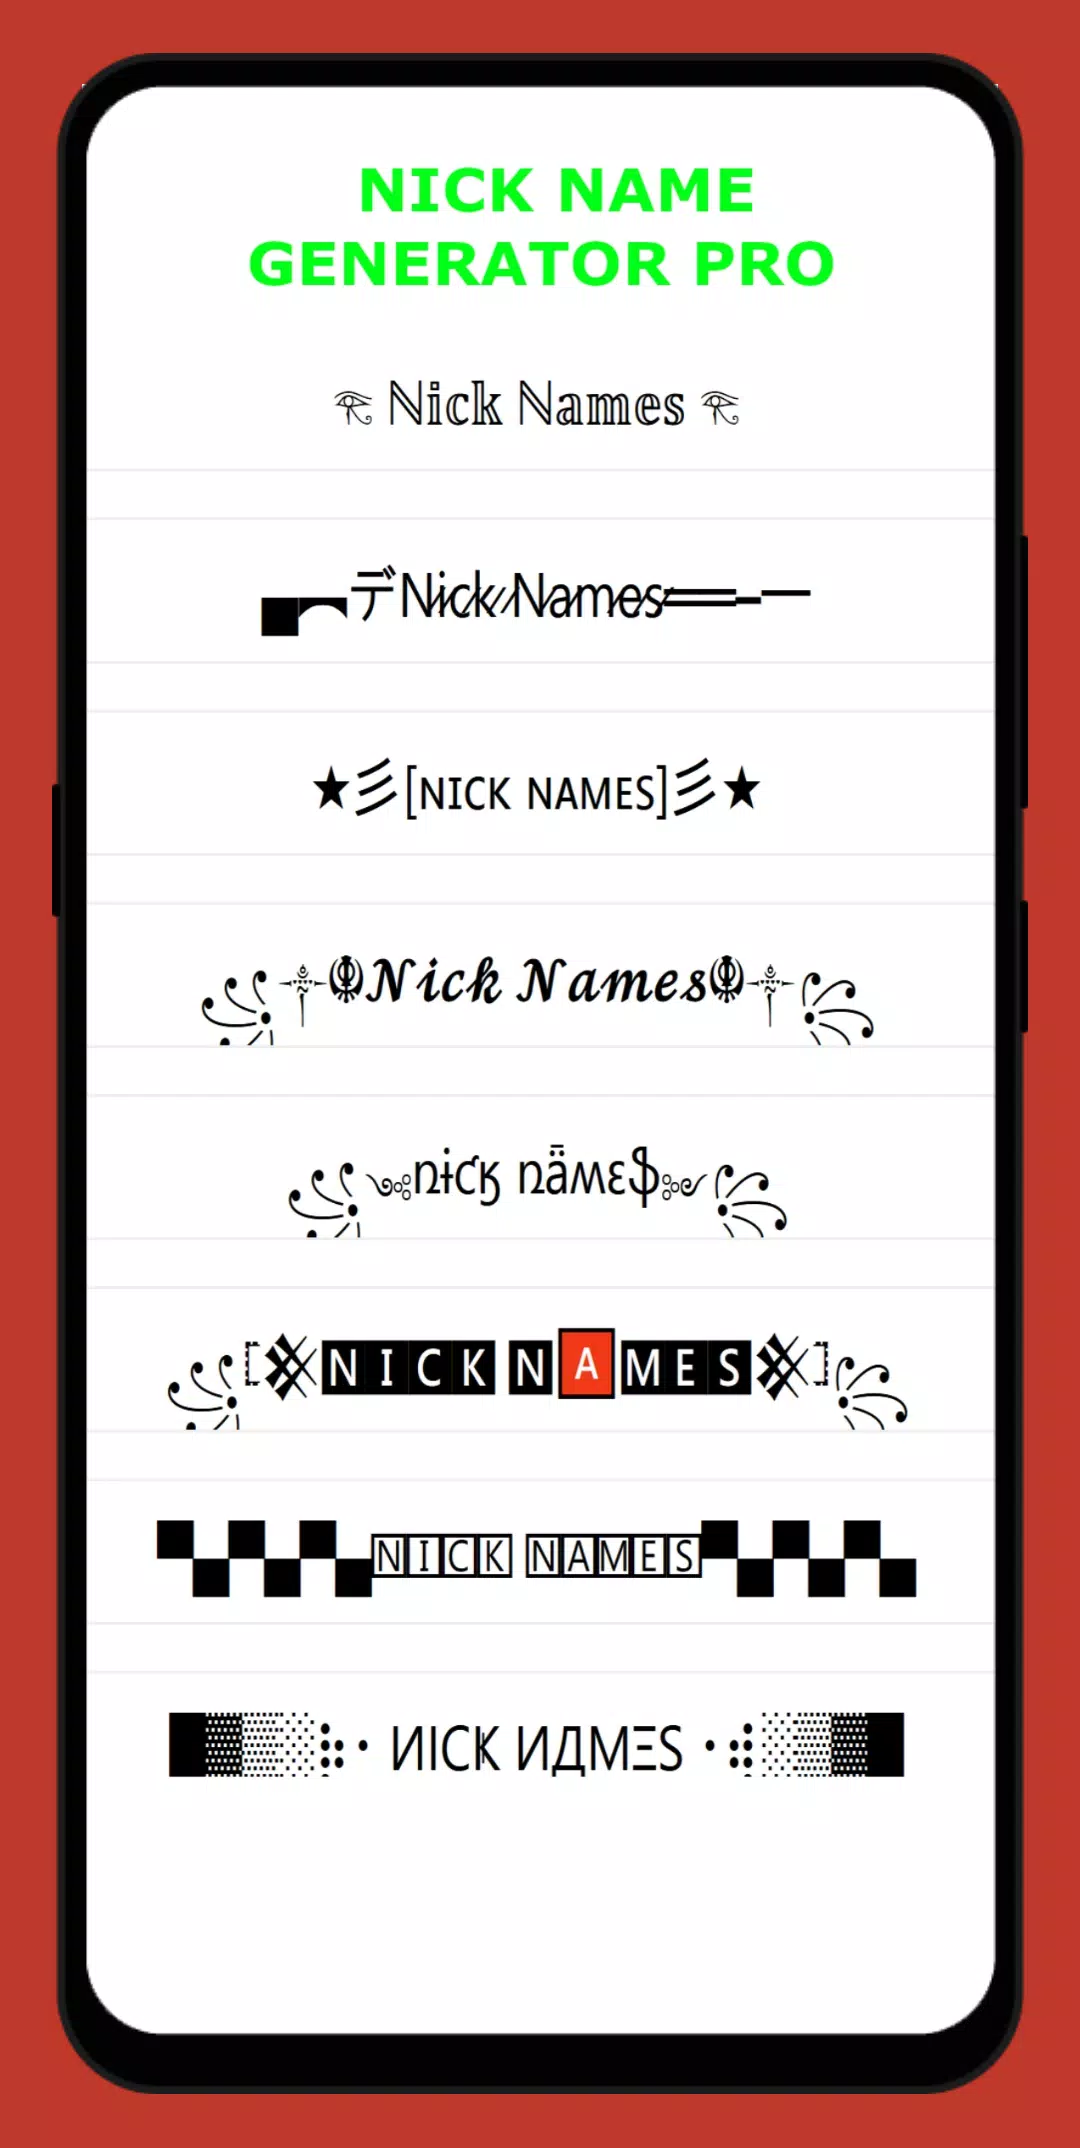 ff Stylish Name Maker APK for Android Download